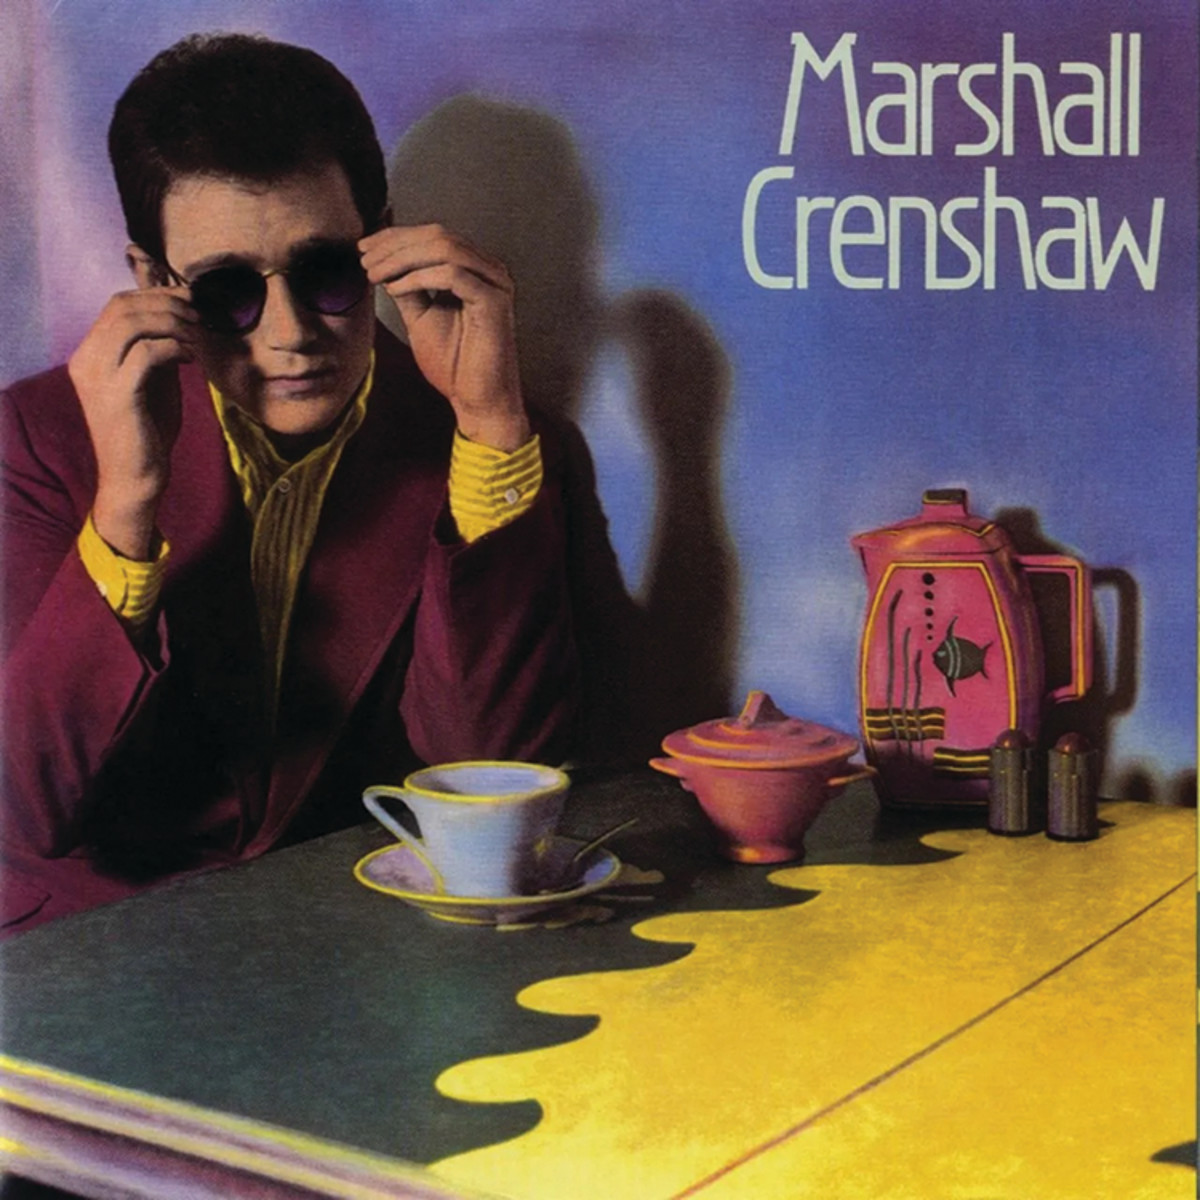 The original cover of the Marshall Crenshaw's 1982 self-titled debut album.